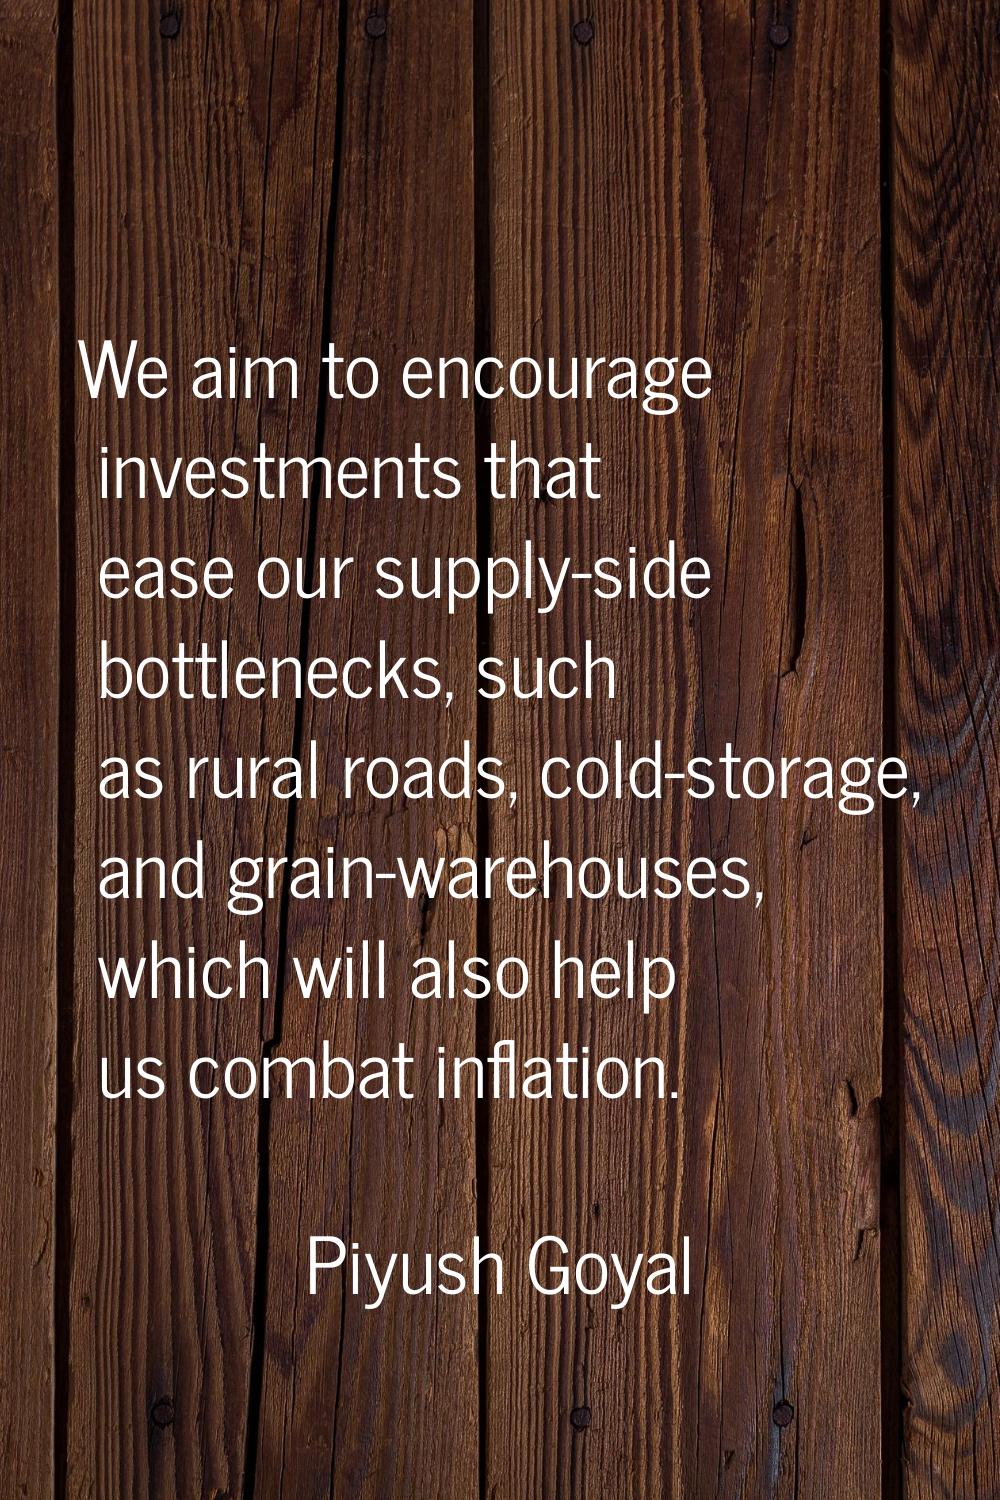 We aim to encourage investments that ease our supply-side bottlenecks, such as rural roads, cold-st